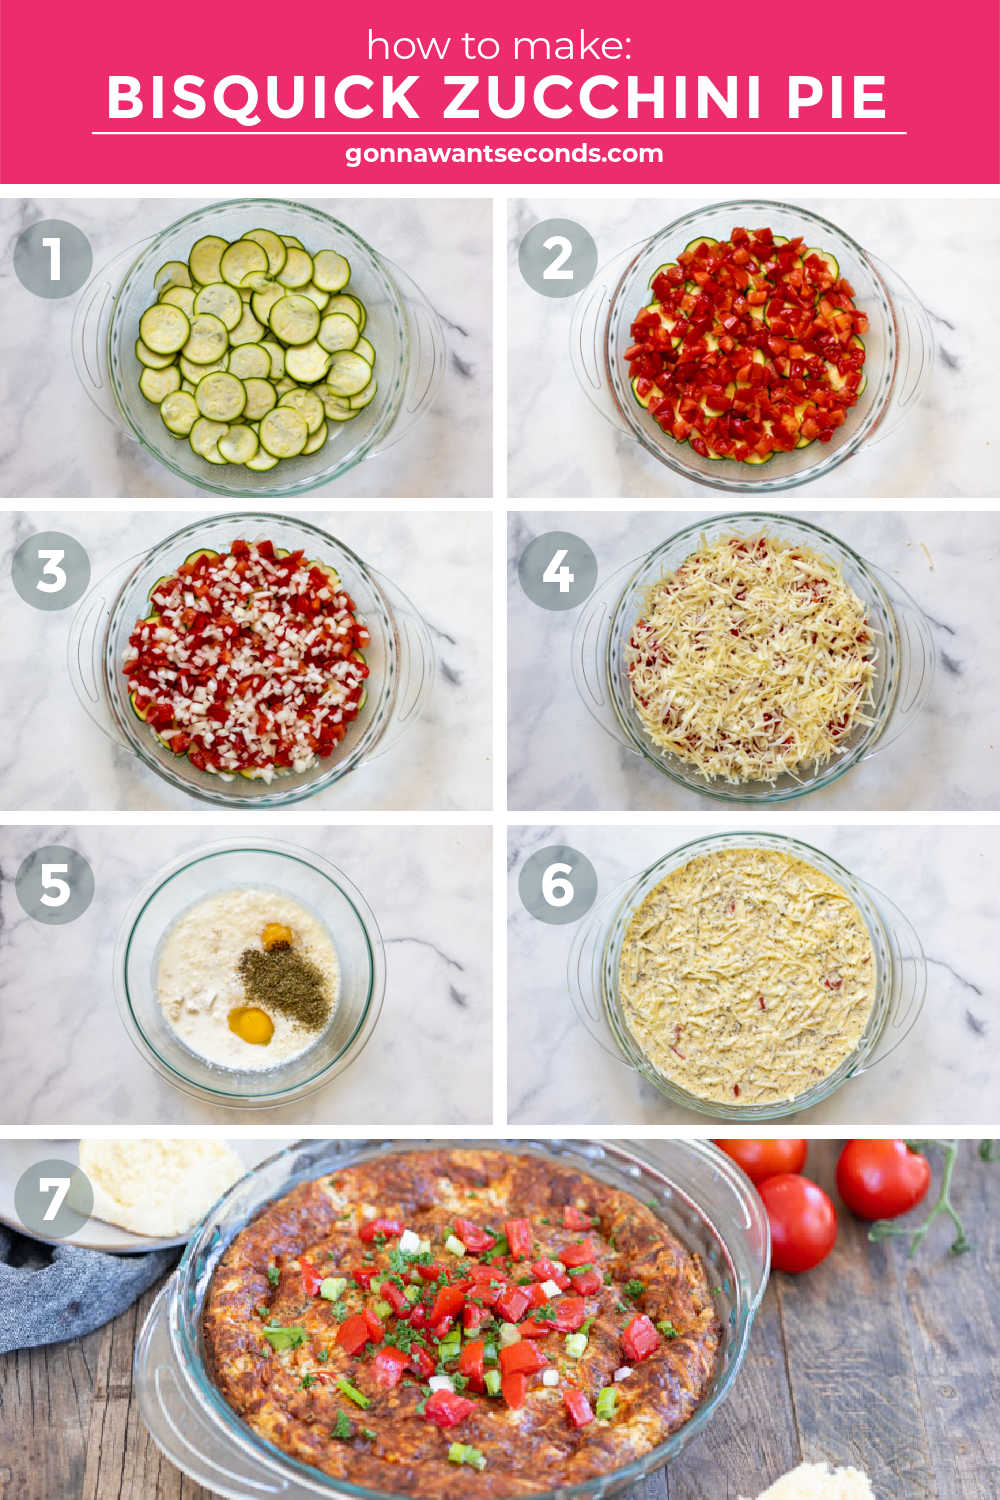 step by step how to make bisquick zucchini pie